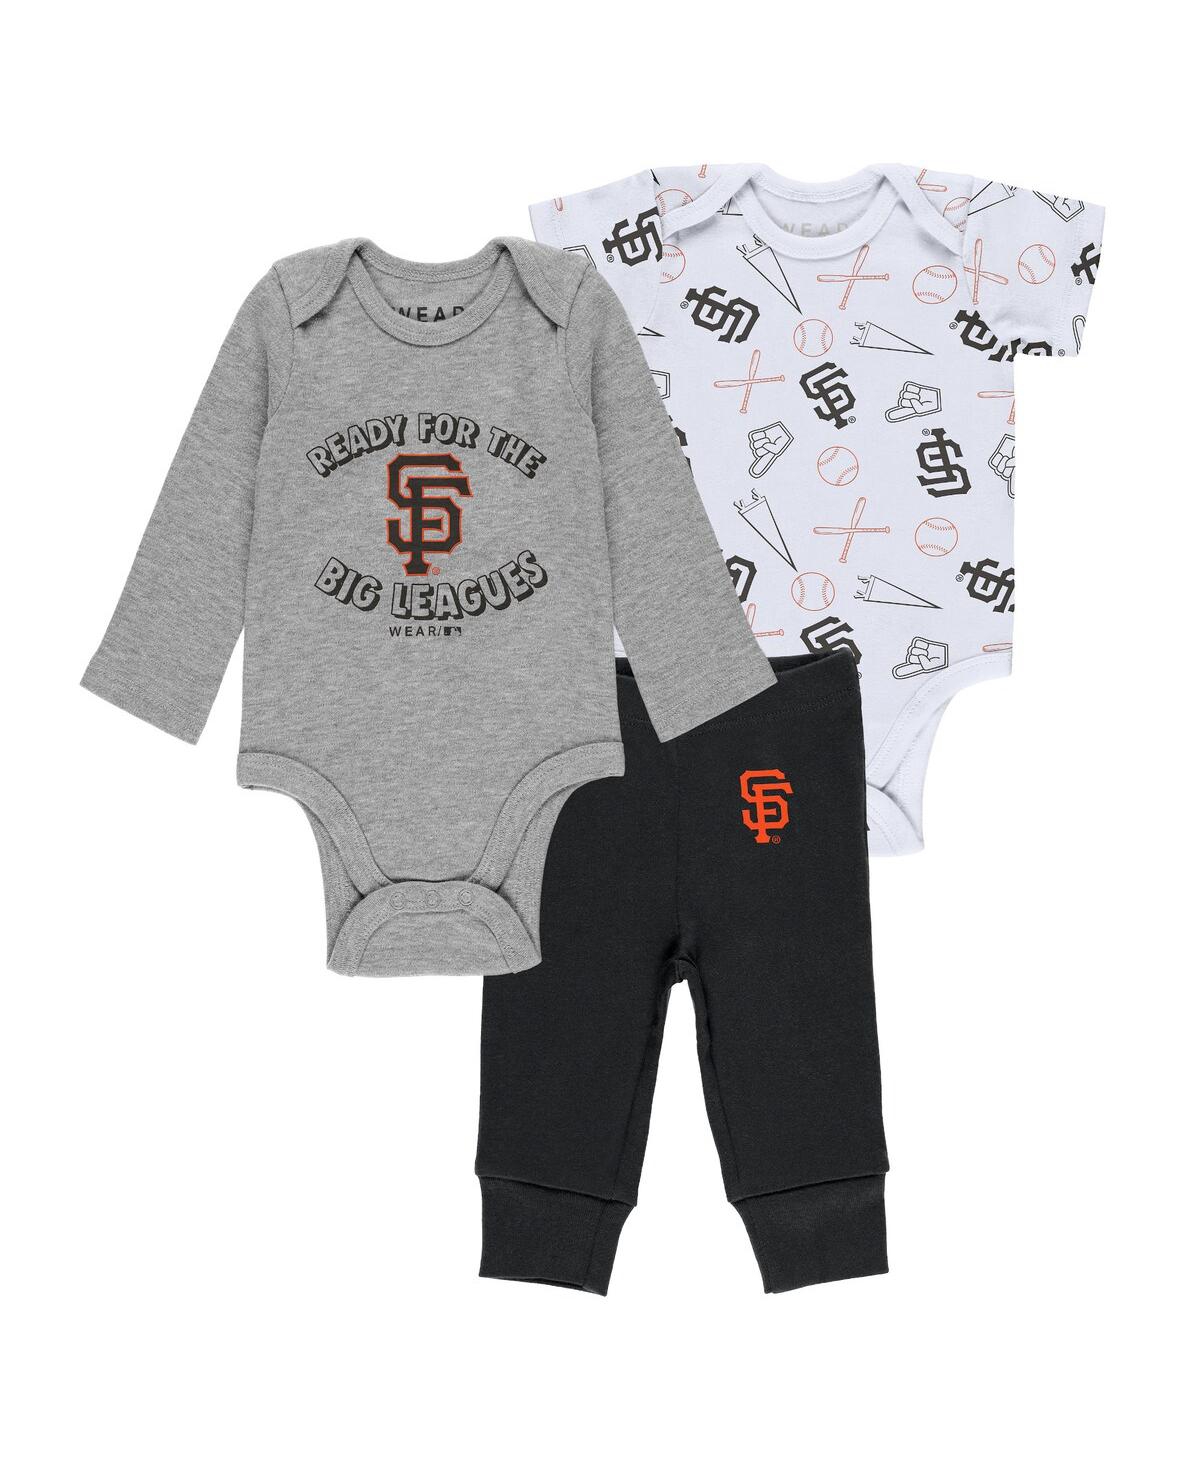 Shop Wear By Erin Andrews Baby Boys And Girls  Gray, White, Black San Francisco Giants Three-piece Turn Me In Gray,white,black